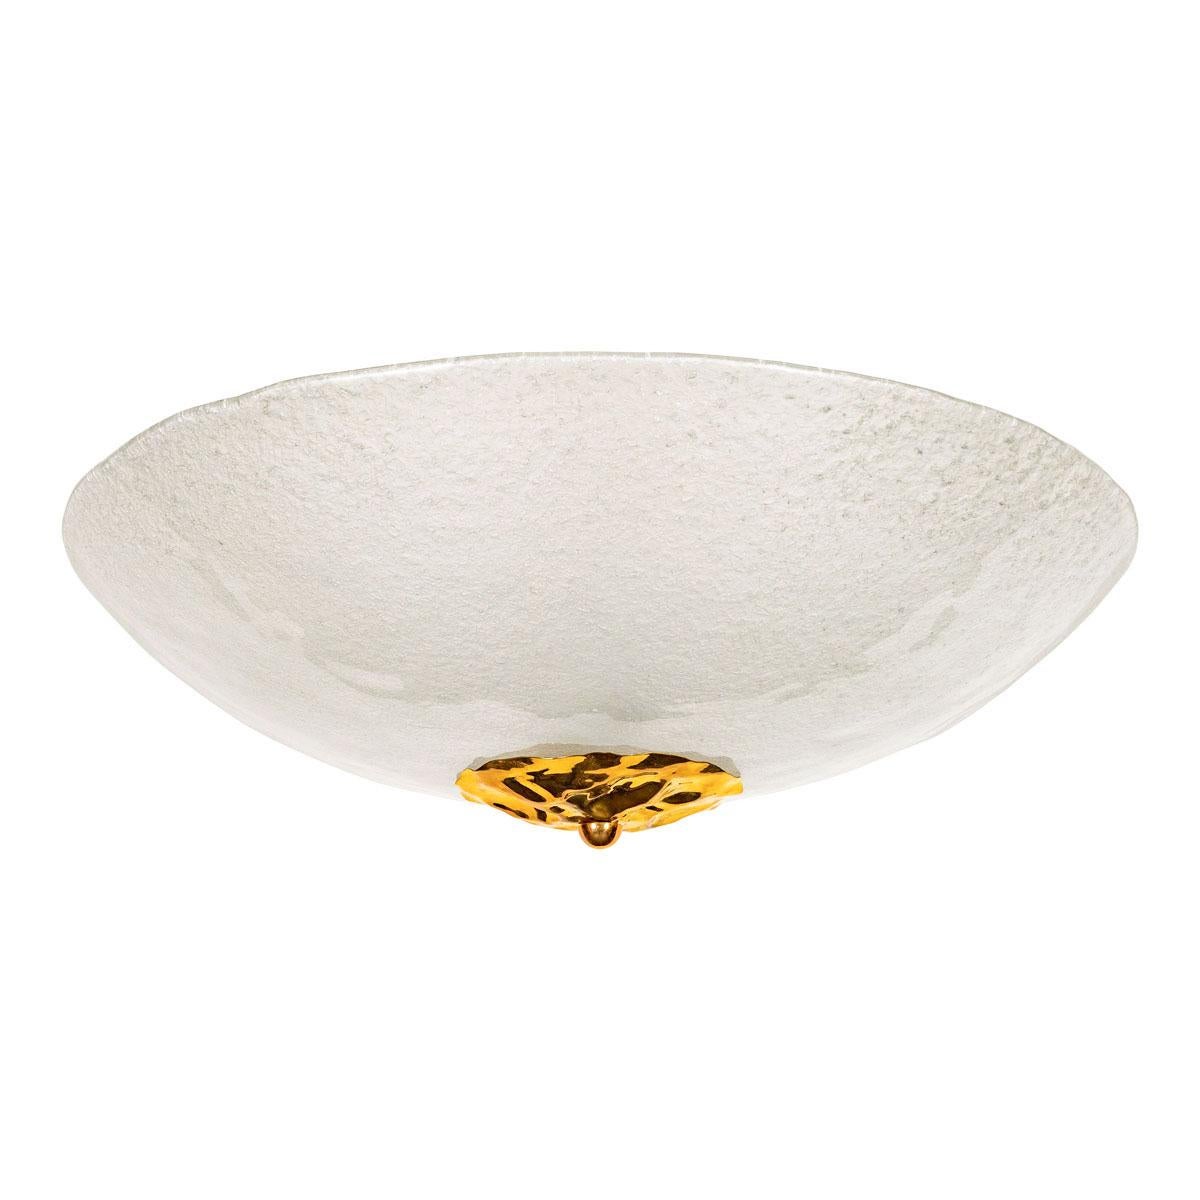 Frosted Murano glass bowl flush mount with hammered brass cap detail.